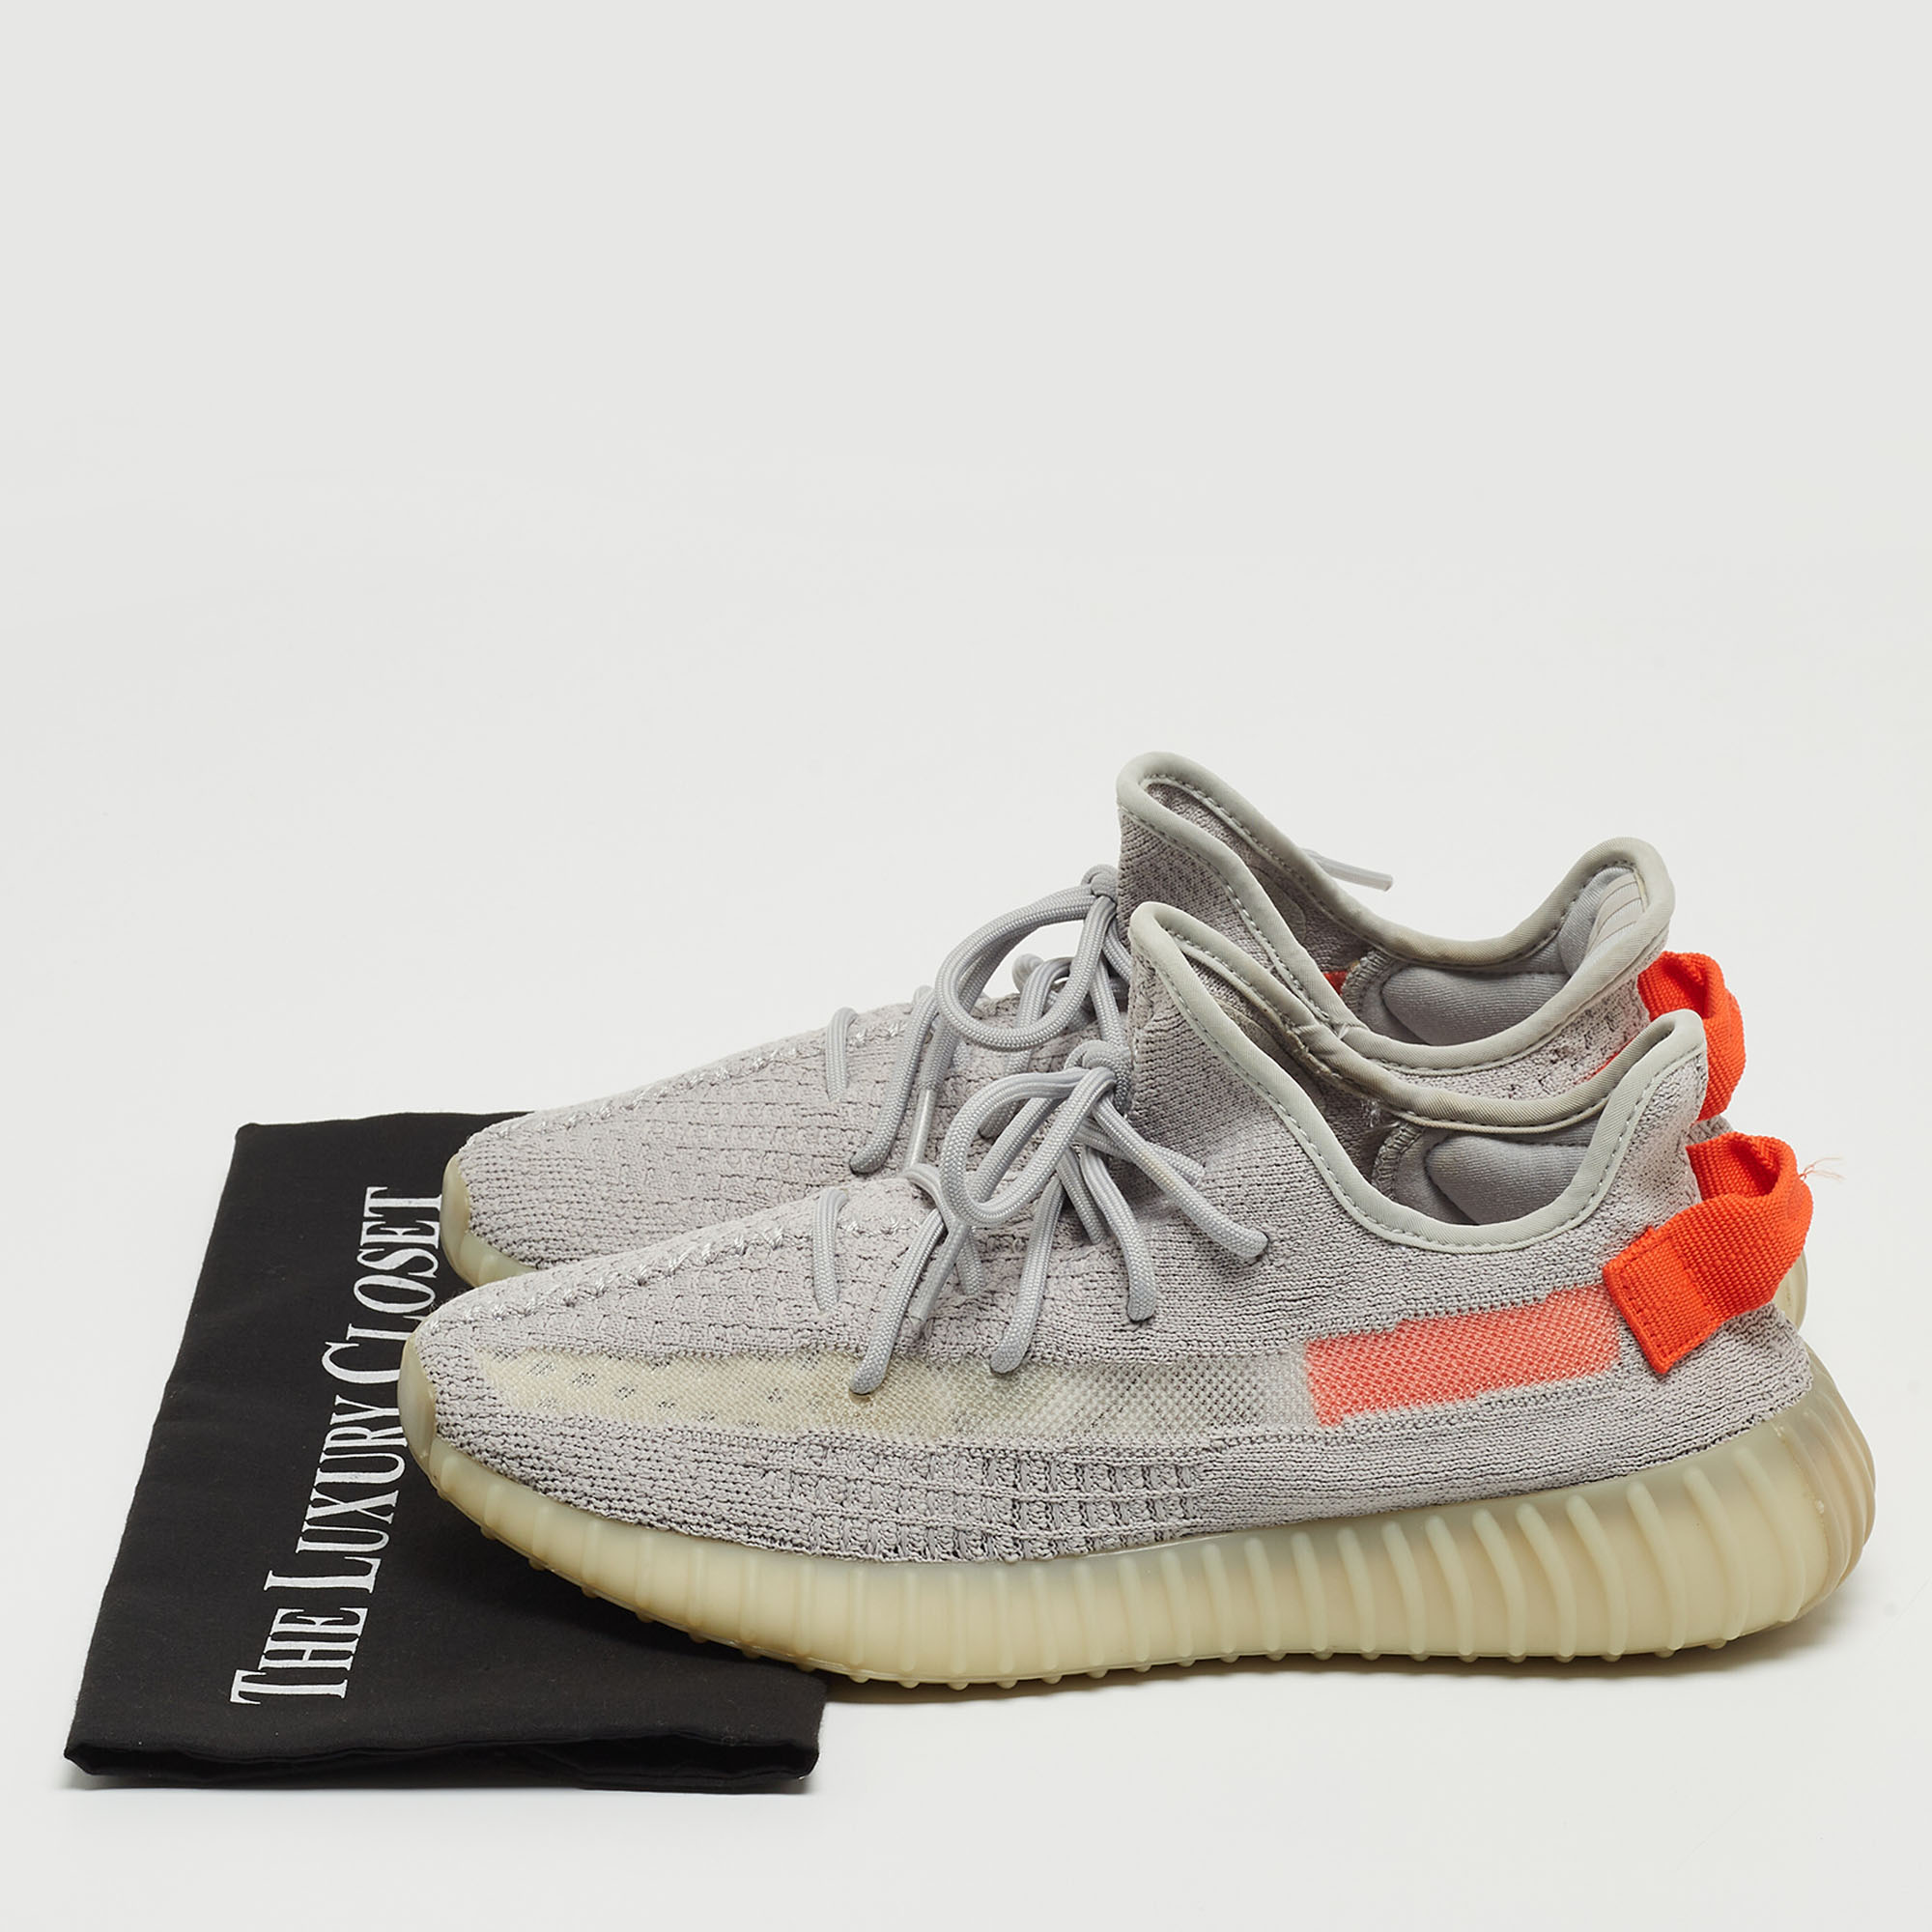 Yeezy X Adidas Grey Knit Fabric Boost 350 V2 Tail Light Sneakers Size 40 2/3